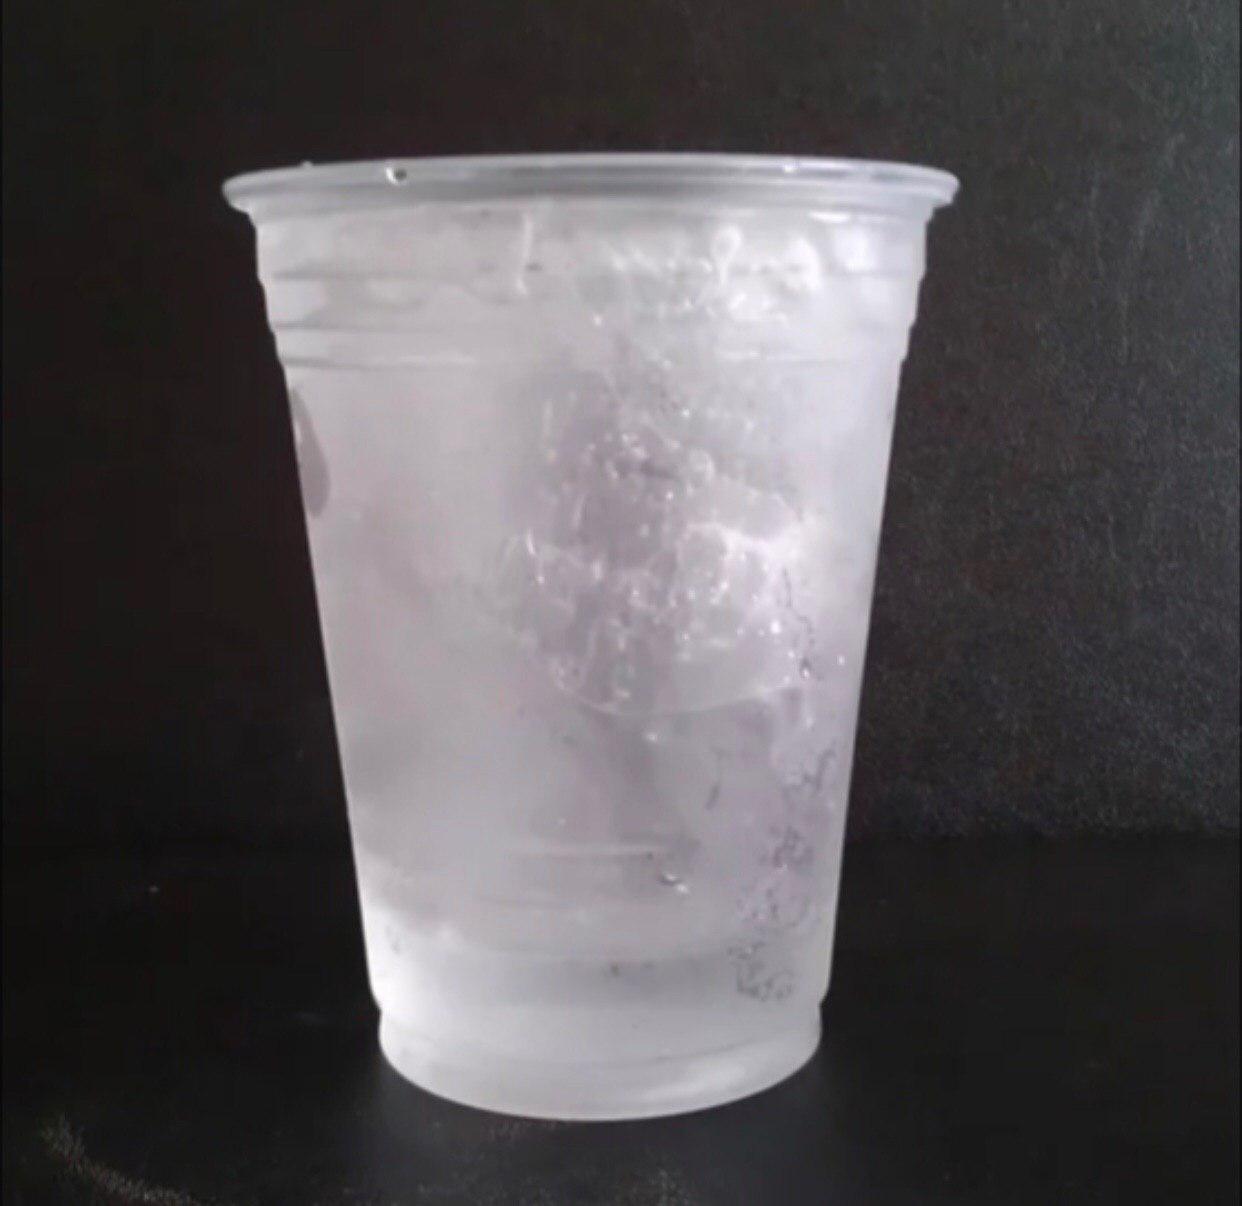 A cup of ice